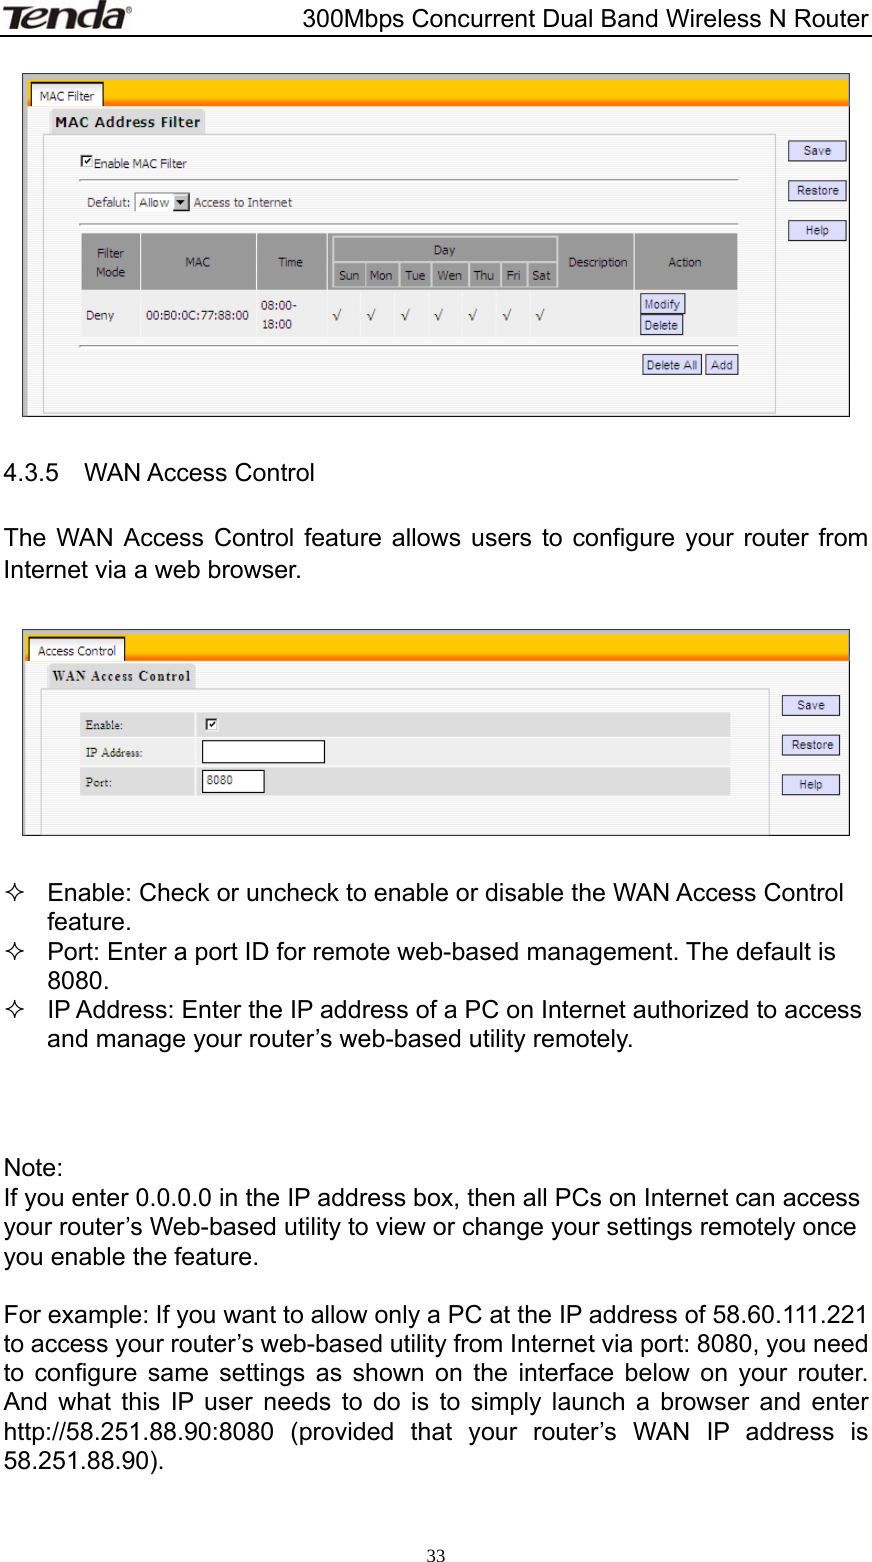                       300Mbps Concurrent Dual Band Wireless N Router  33  4.3.5  WAN Access Control  The WAN Access Control feature allows users to configure your router from Internet via a web browser.      Enable: Check or uncheck to enable or disable the WAN Access Control feature.   Port: Enter a port ID for remote web-based management. The default is 8080.   IP Address: Enter the IP address of a PC on Internet authorized to access and manage your router’s web-based utility remotely.    Note: If you enter 0.0.0.0 in the IP address box, then all PCs on Internet can access your router’s Web-based utility to view or change your settings remotely once you enable the feature.  For example: If you want to allow only a PC at the IP address of 58.60.111.221 to access your router’s web-based utility from Internet via port: 8080, you need to configure same settings as shown on the interface below on your router. And what this IP user needs to do is to simply launch a browser and enter http://58.251.88.90:8080 (provided that your router’s WAN IP address is 58.251.88.90).   